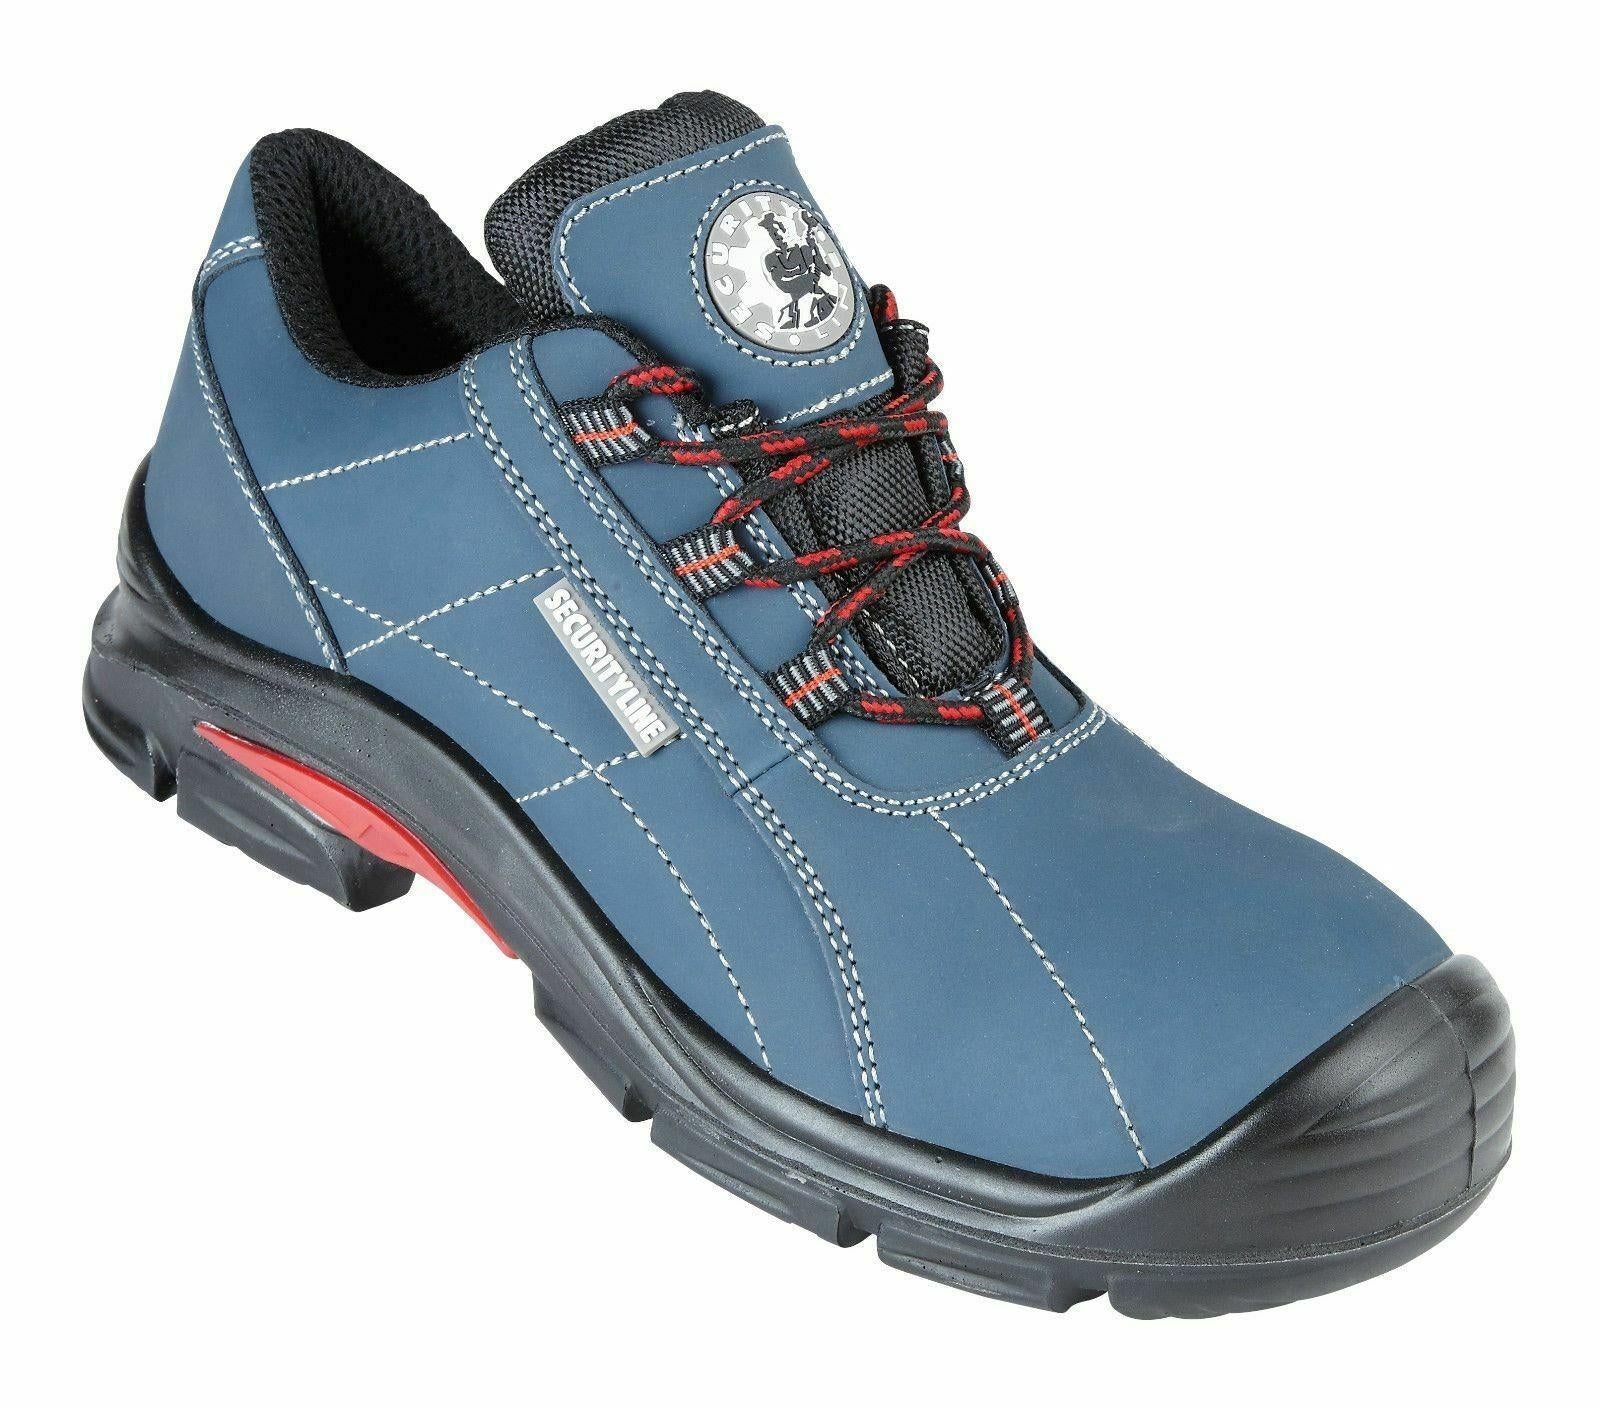 Himalayan Tucan S3 blue metal-free composite toe/midsole safety trainer #4210